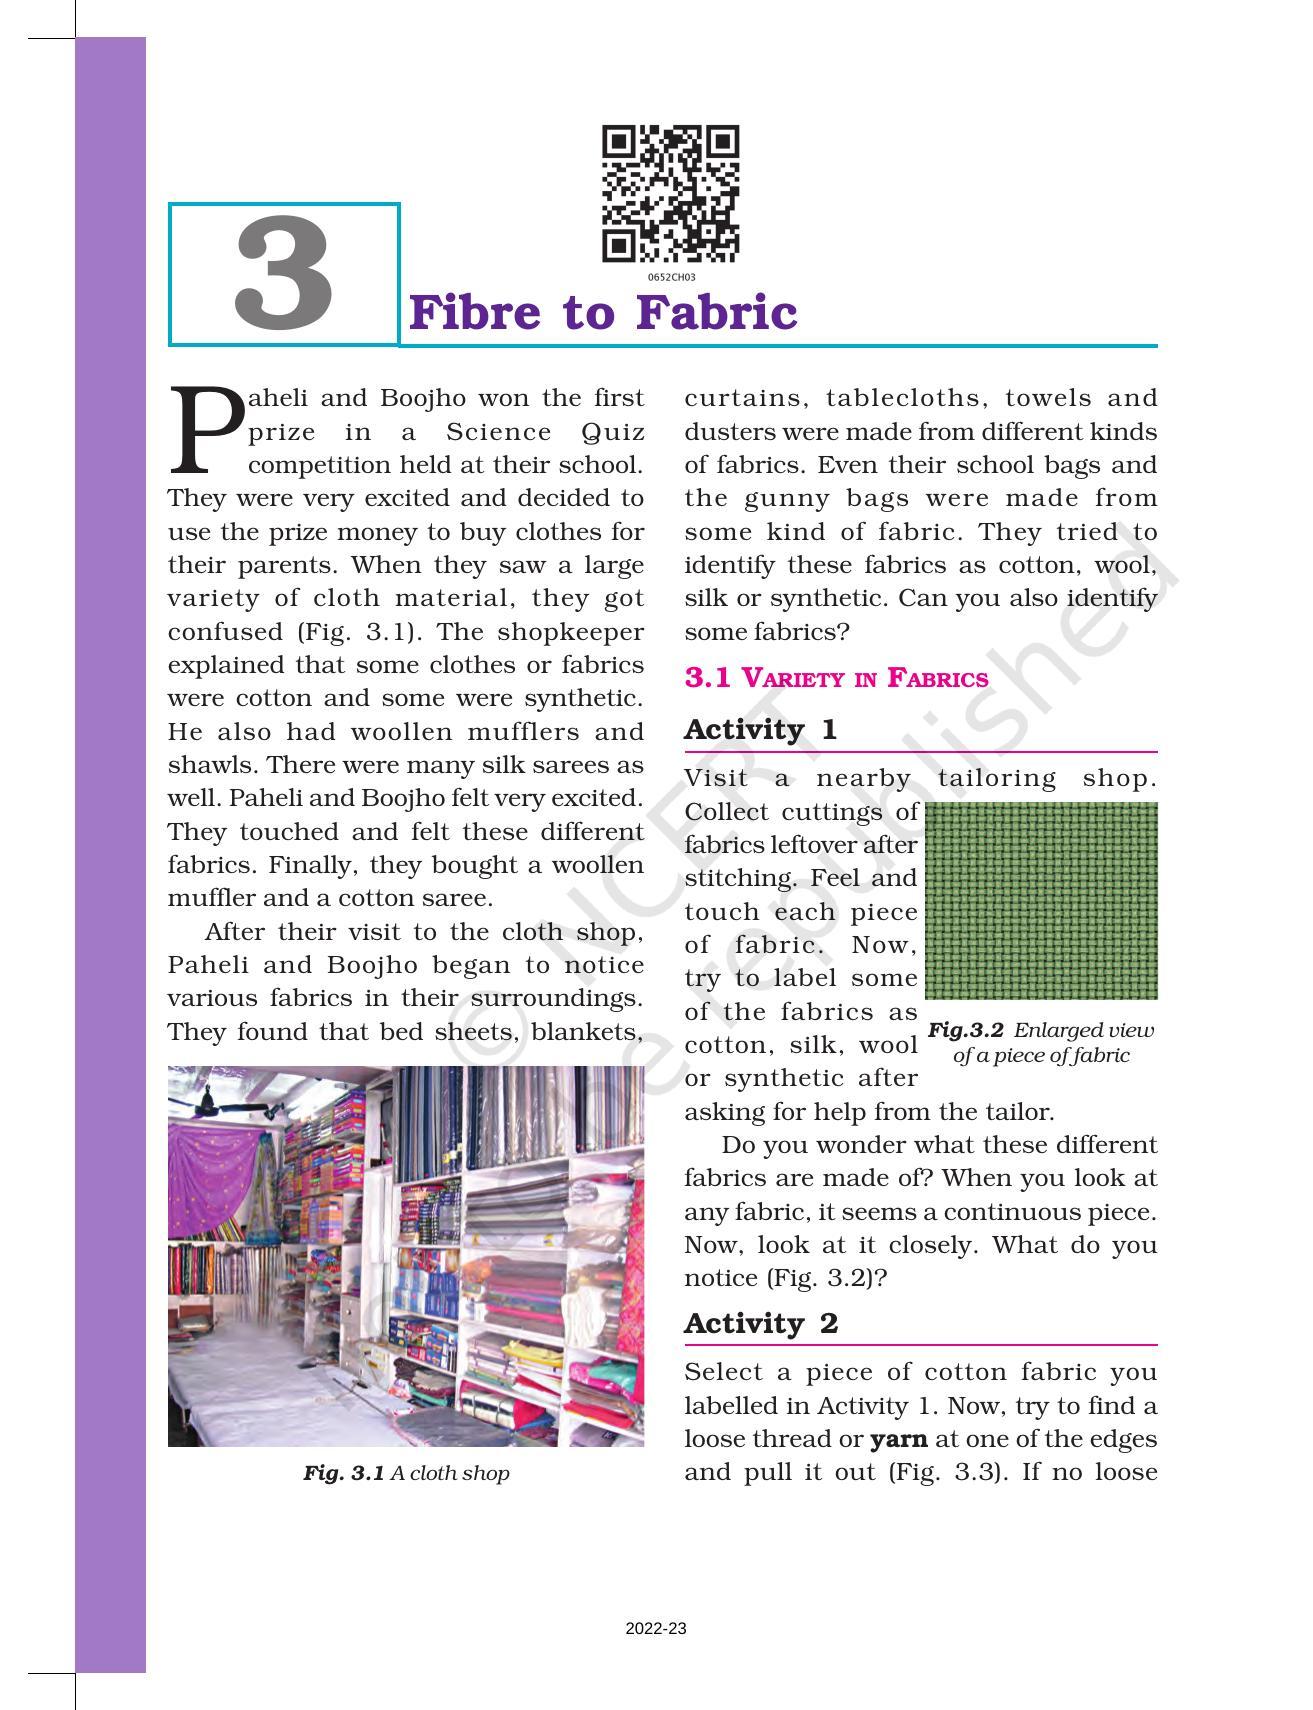 NCERT Book for Class 6 Science: Chapter 3-Fibre to Fabric - Page 1